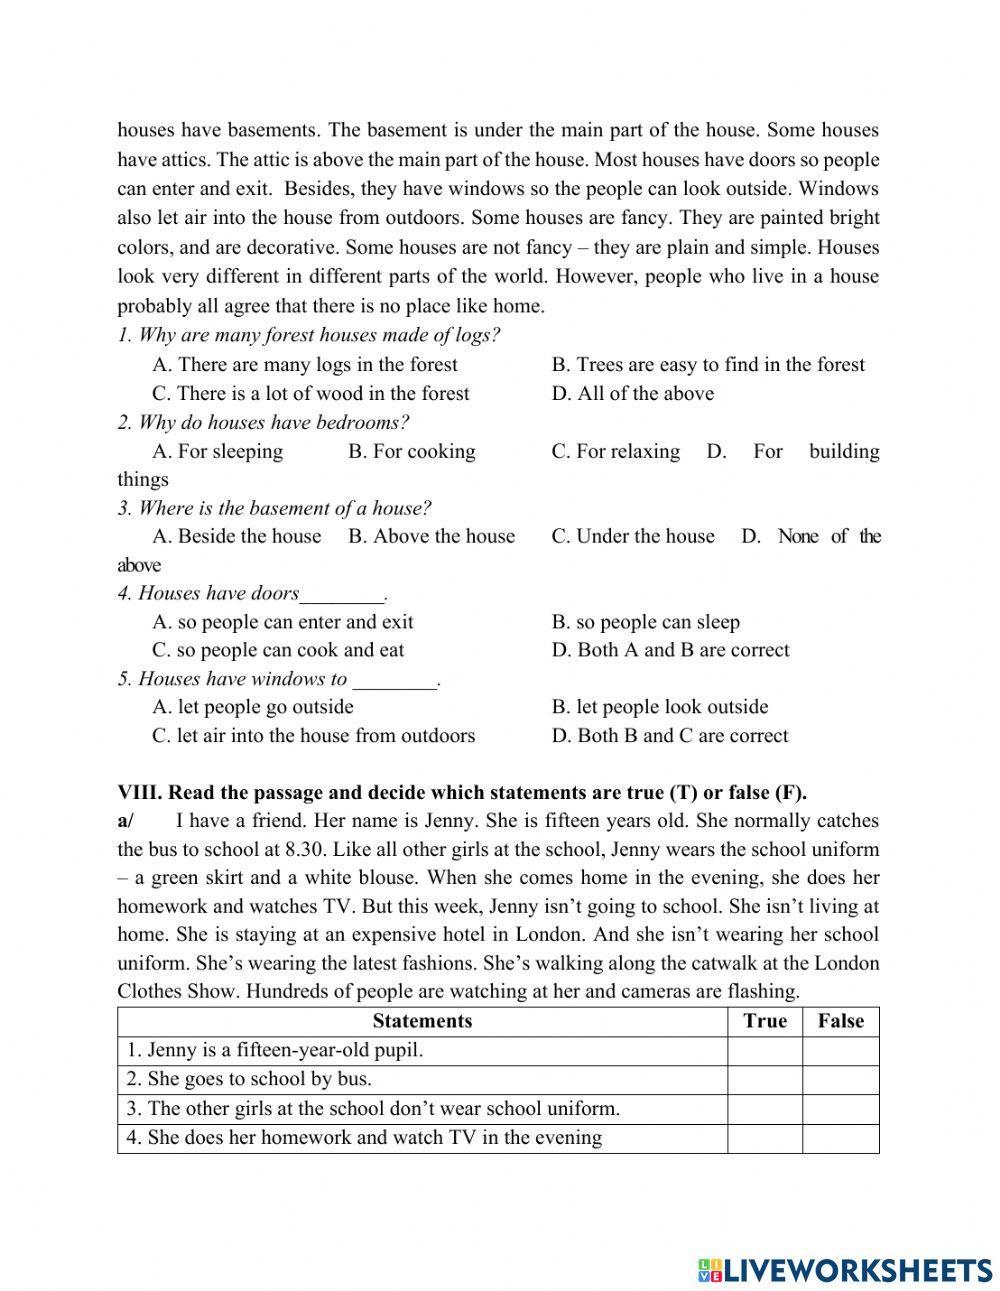 Review mid term 1- TIẾNG ANH LỚP 6